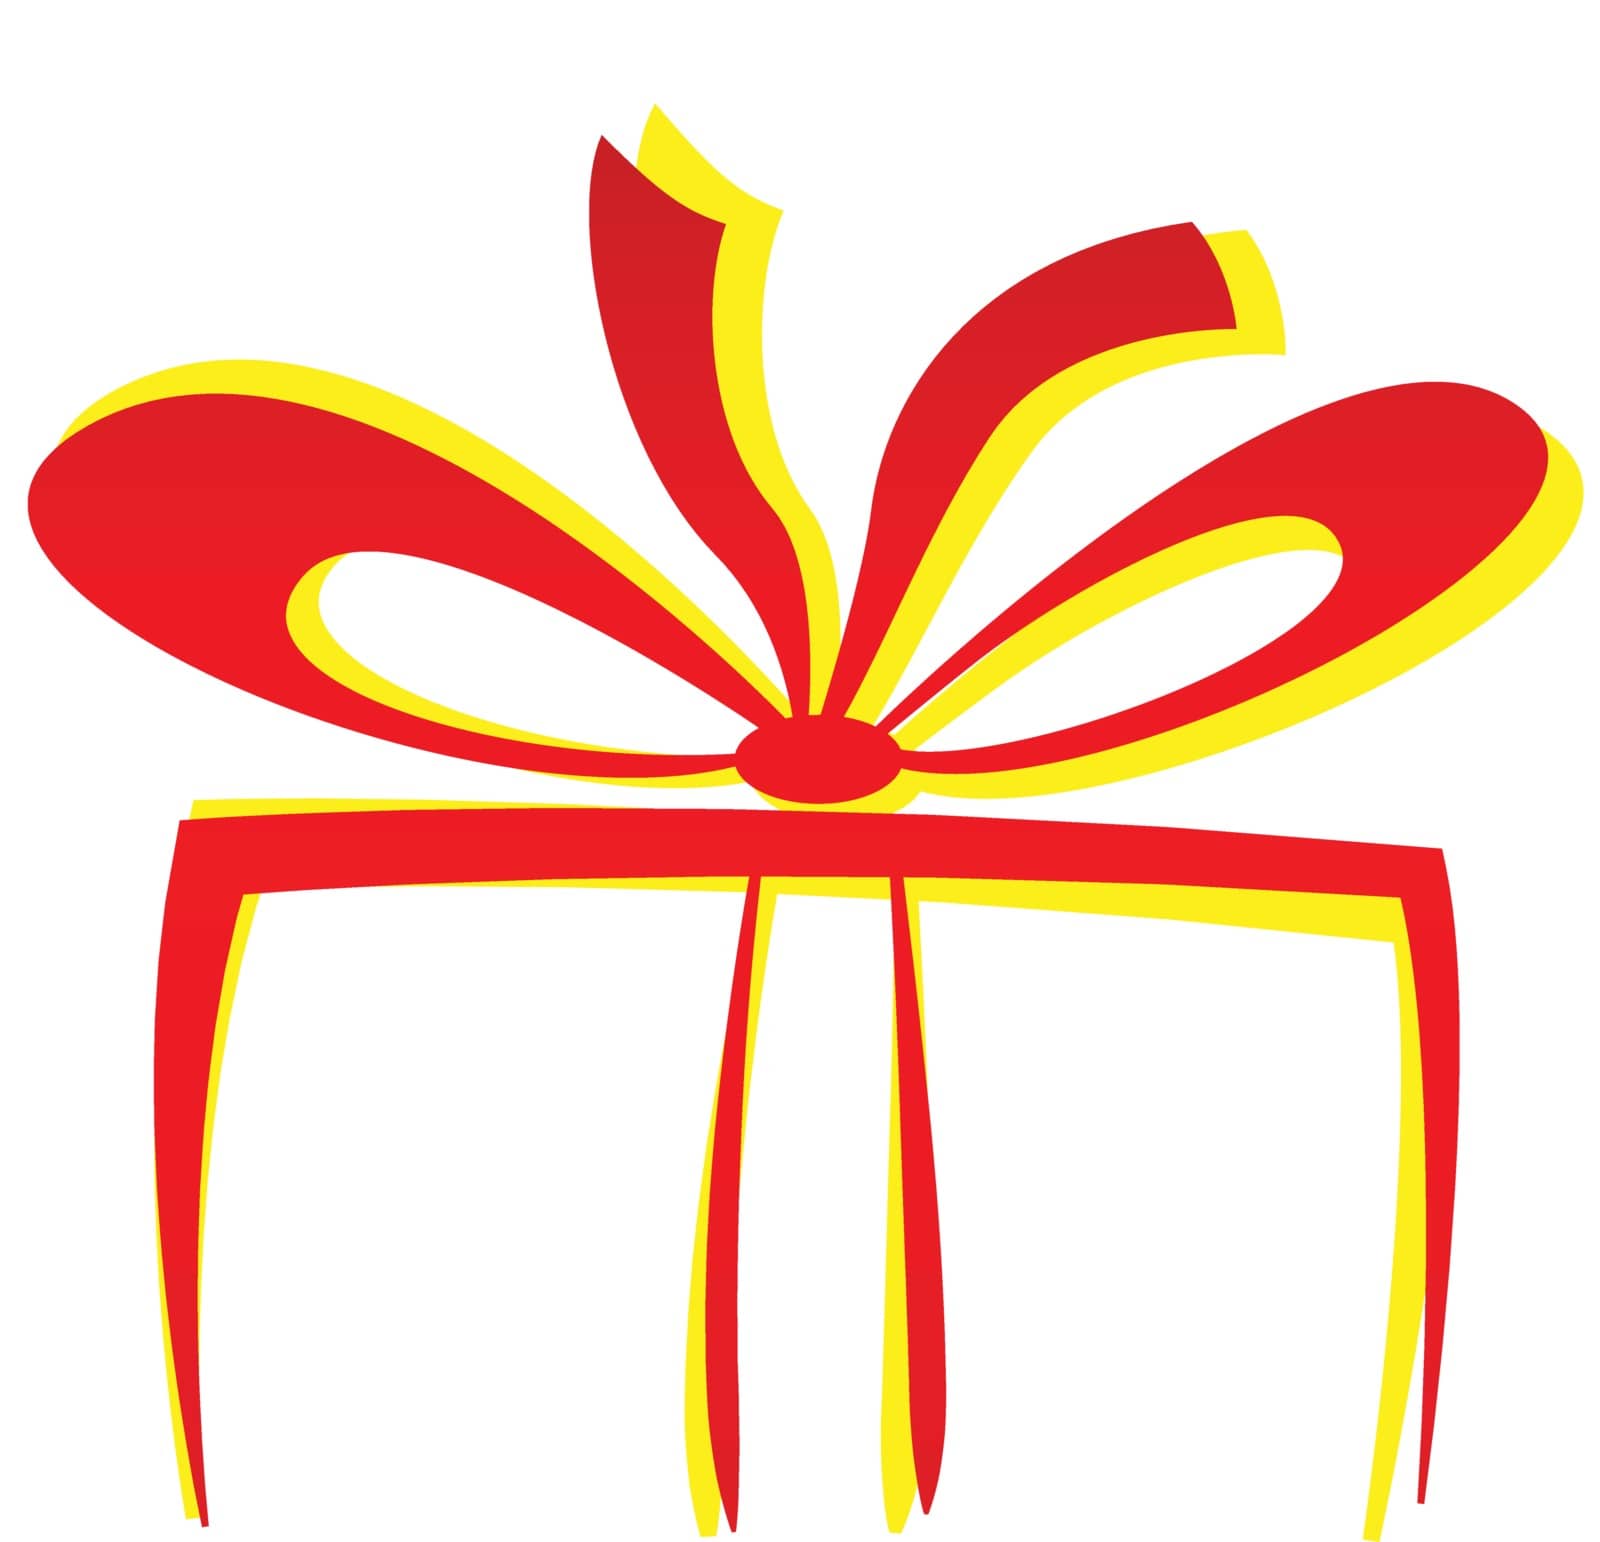 Illustration of red gift box drawing on white background